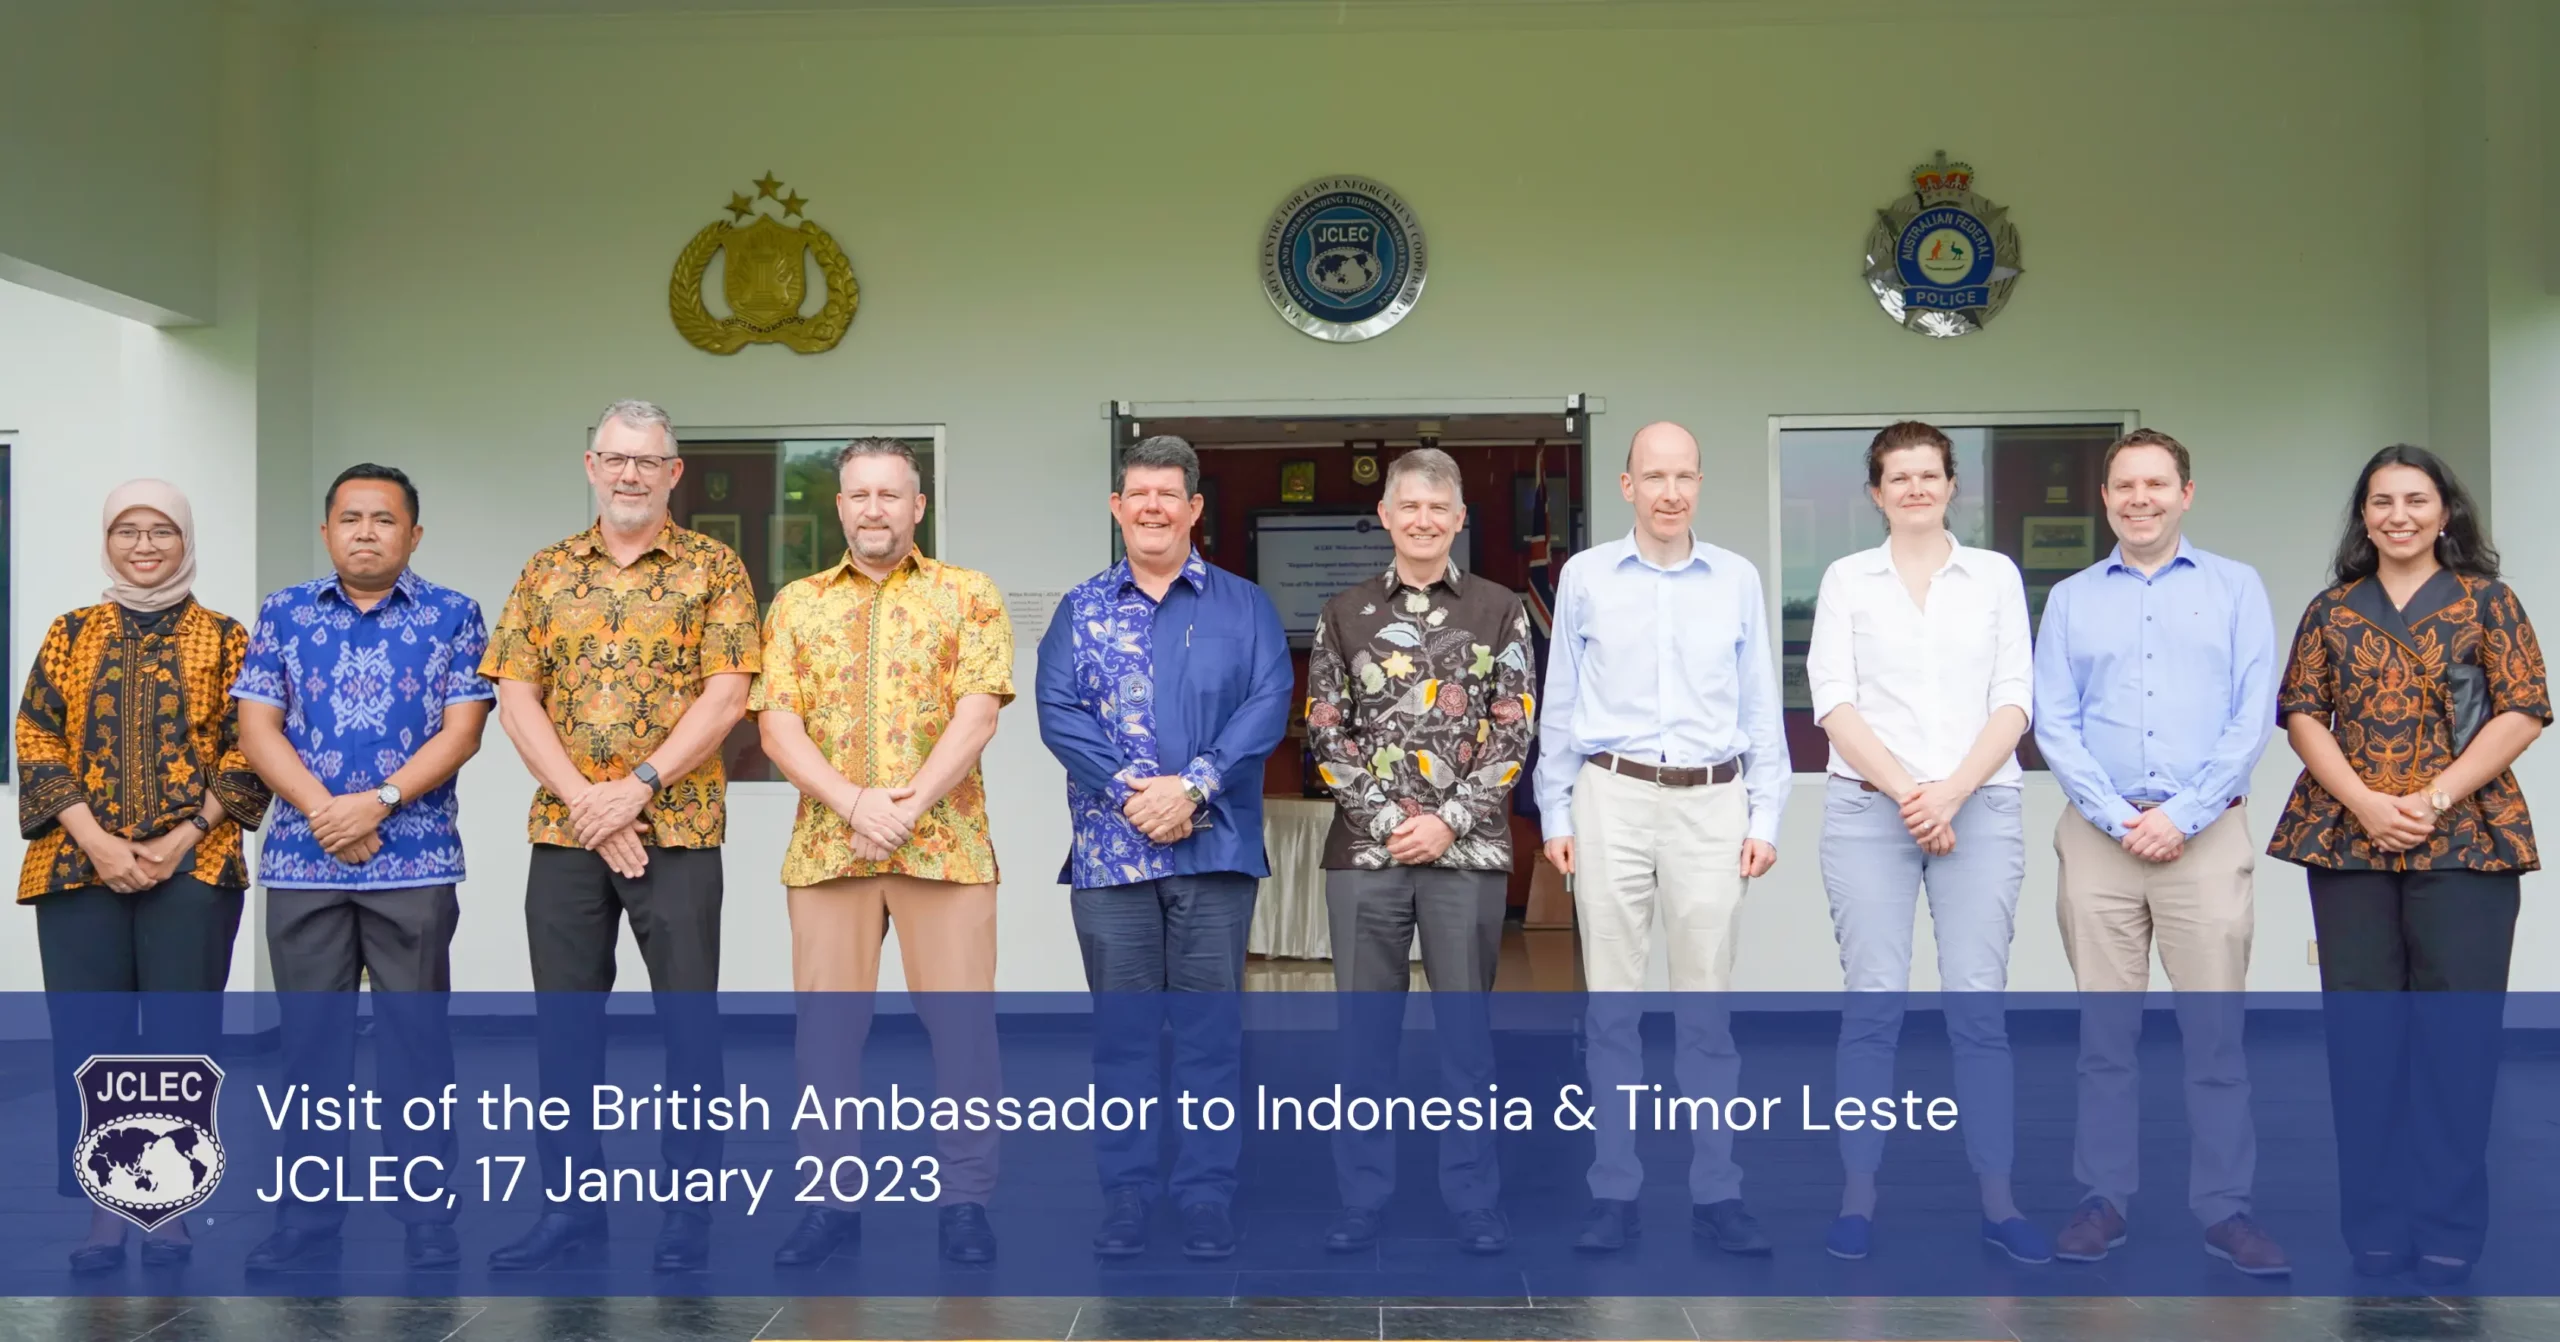 The official photograph of of the British Ambassador to Indonesia & Timor Leste and Director of Joint Funds